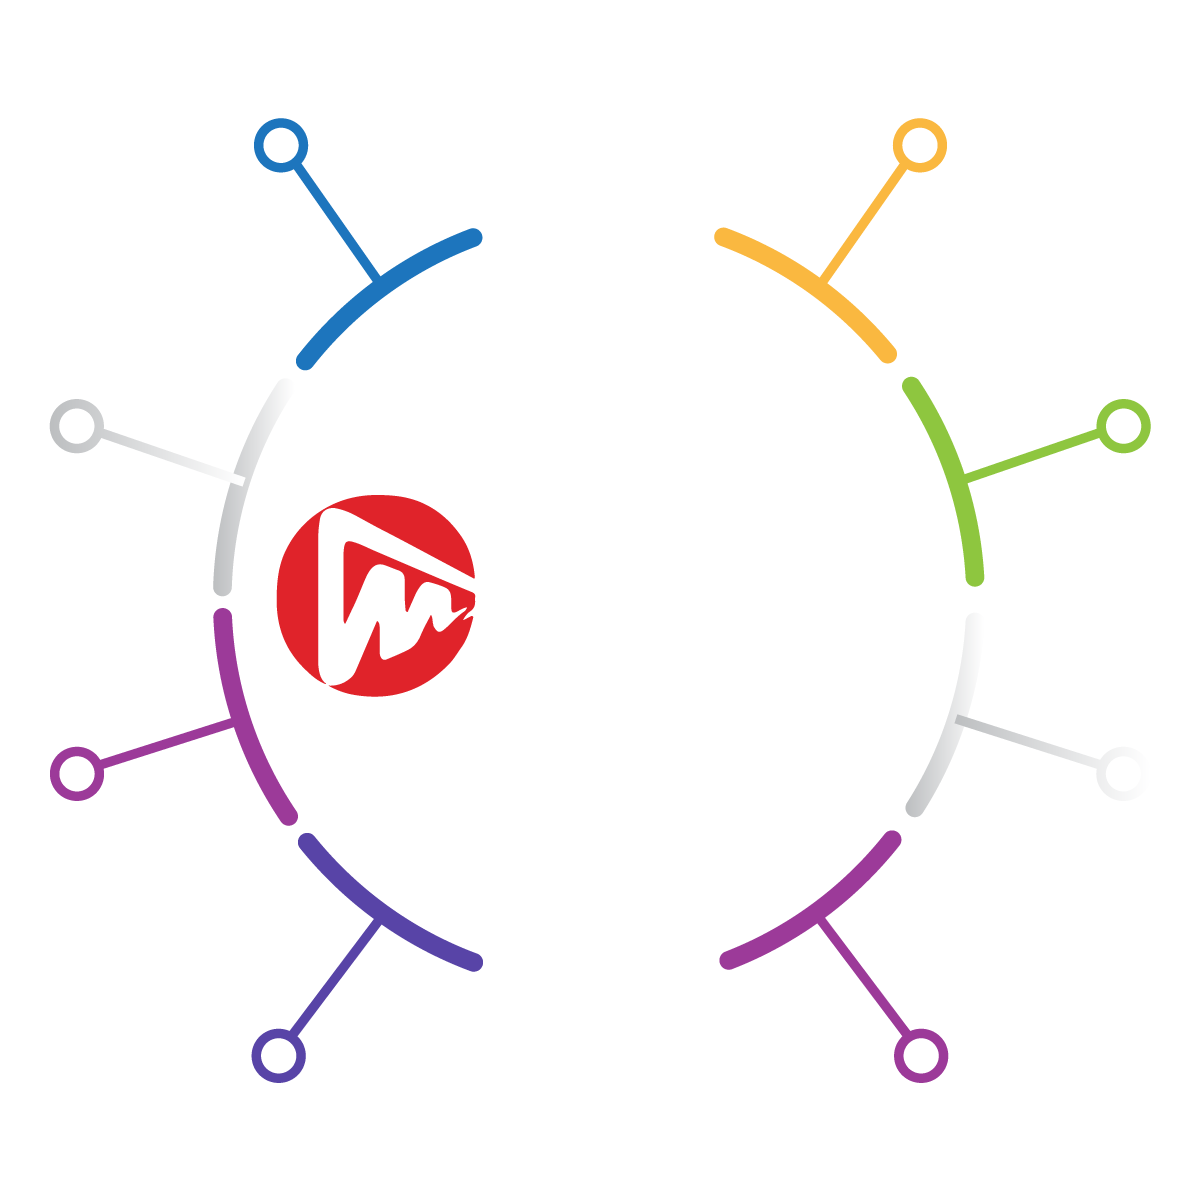 Mideatek, I.T solutions provider, E-marketing, SEO, web development, Android app, iOS app, system integration,brand book, logo design, e-marketing, social media marketing, corporate website, webstore, e-commerce store, multivendor store, restaurant management system (pos), customer relationship management, point of sale (pos) software, company profile, email marketing, whatsapp marketing, influencer marketing, accounts management software, human resource system, school management system, food delivery, grocery, stationary design, catalog design, hoarding advertisement design, branding,boardroom automation, cctv surveillance, wireless network, assistance-help-support, broadcasting, video-wall, access control system, management solution, network infrastructure, it strategy consulting, it operations consulting, it project and program management, iot system integration, enterprise application integration, media monitoring, security system, biometric systems, ip-pabx-intercom solutions, audio-video system, enterprise data storage, backup and disaster recovery, smart home, conference room management system, video conferencing, room booking systems, wireless presentation